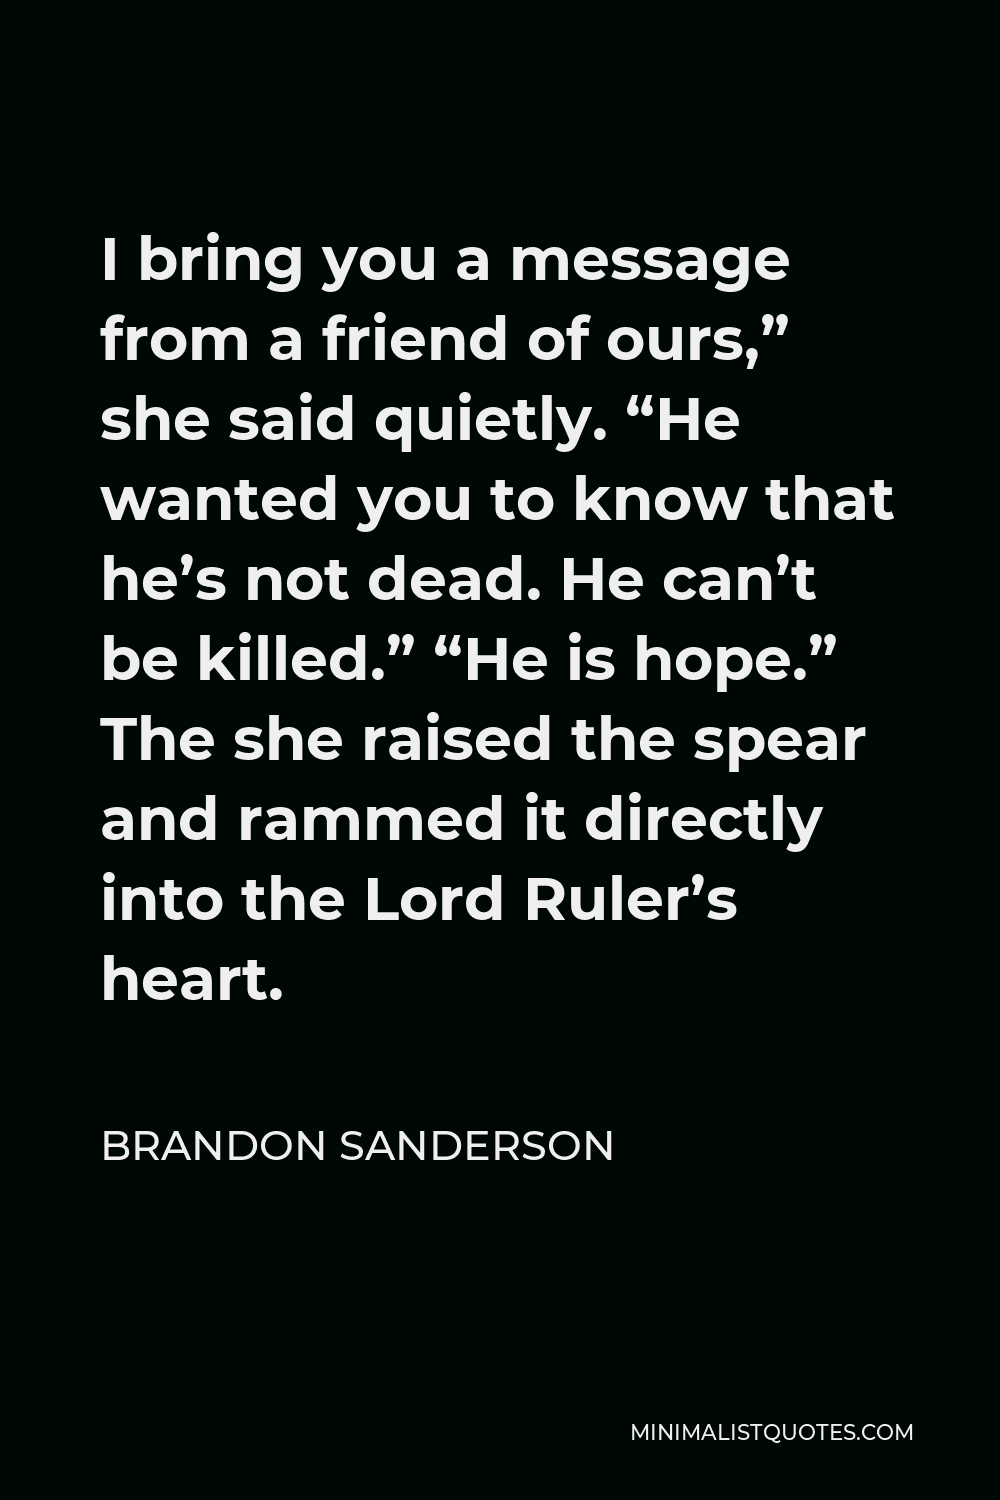 Brandon Sanderson Quote - I bring you a message from a friend of ours,” she said quietly. “He wanted you to know that he’s not dead. He can’t be killed.” “He is hope.” The she raised the spear and rammed it directly into the Lord Ruler’s heart.